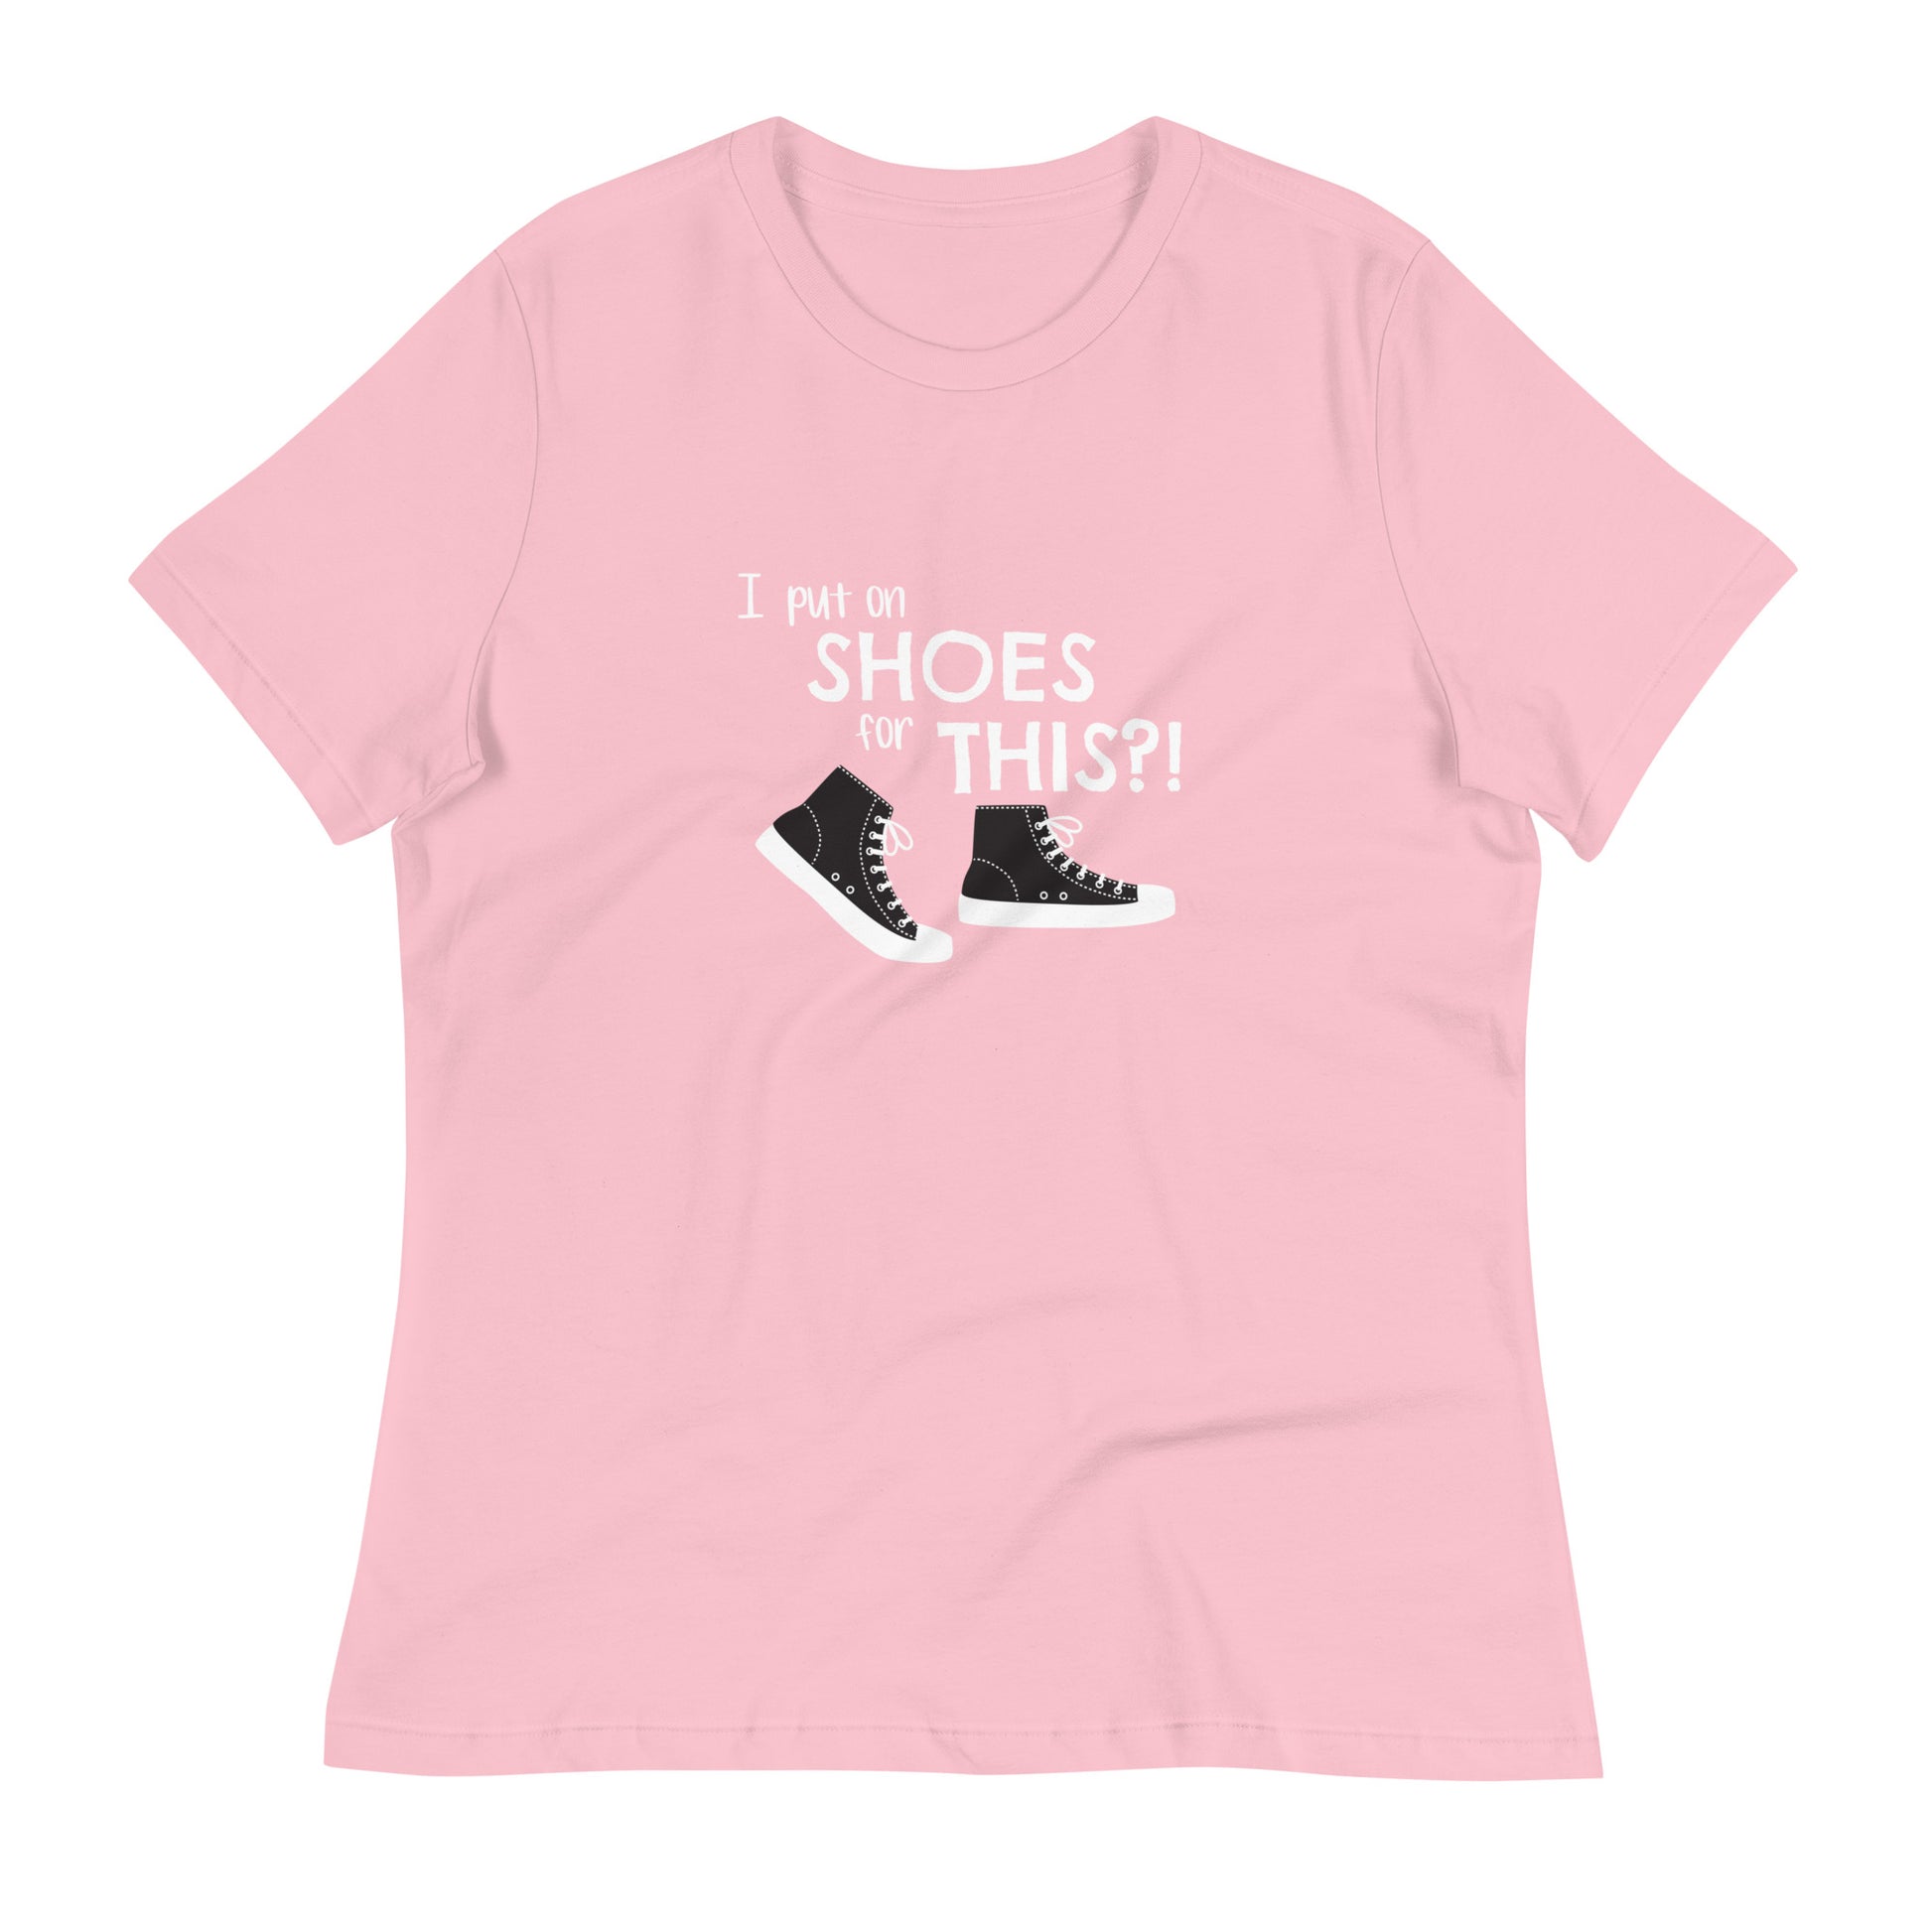 Pink women's relaxed fit t-shirt with graphic of black and white canvas "chuck" sneakers and text: "I put on SHOES for THIS?!"